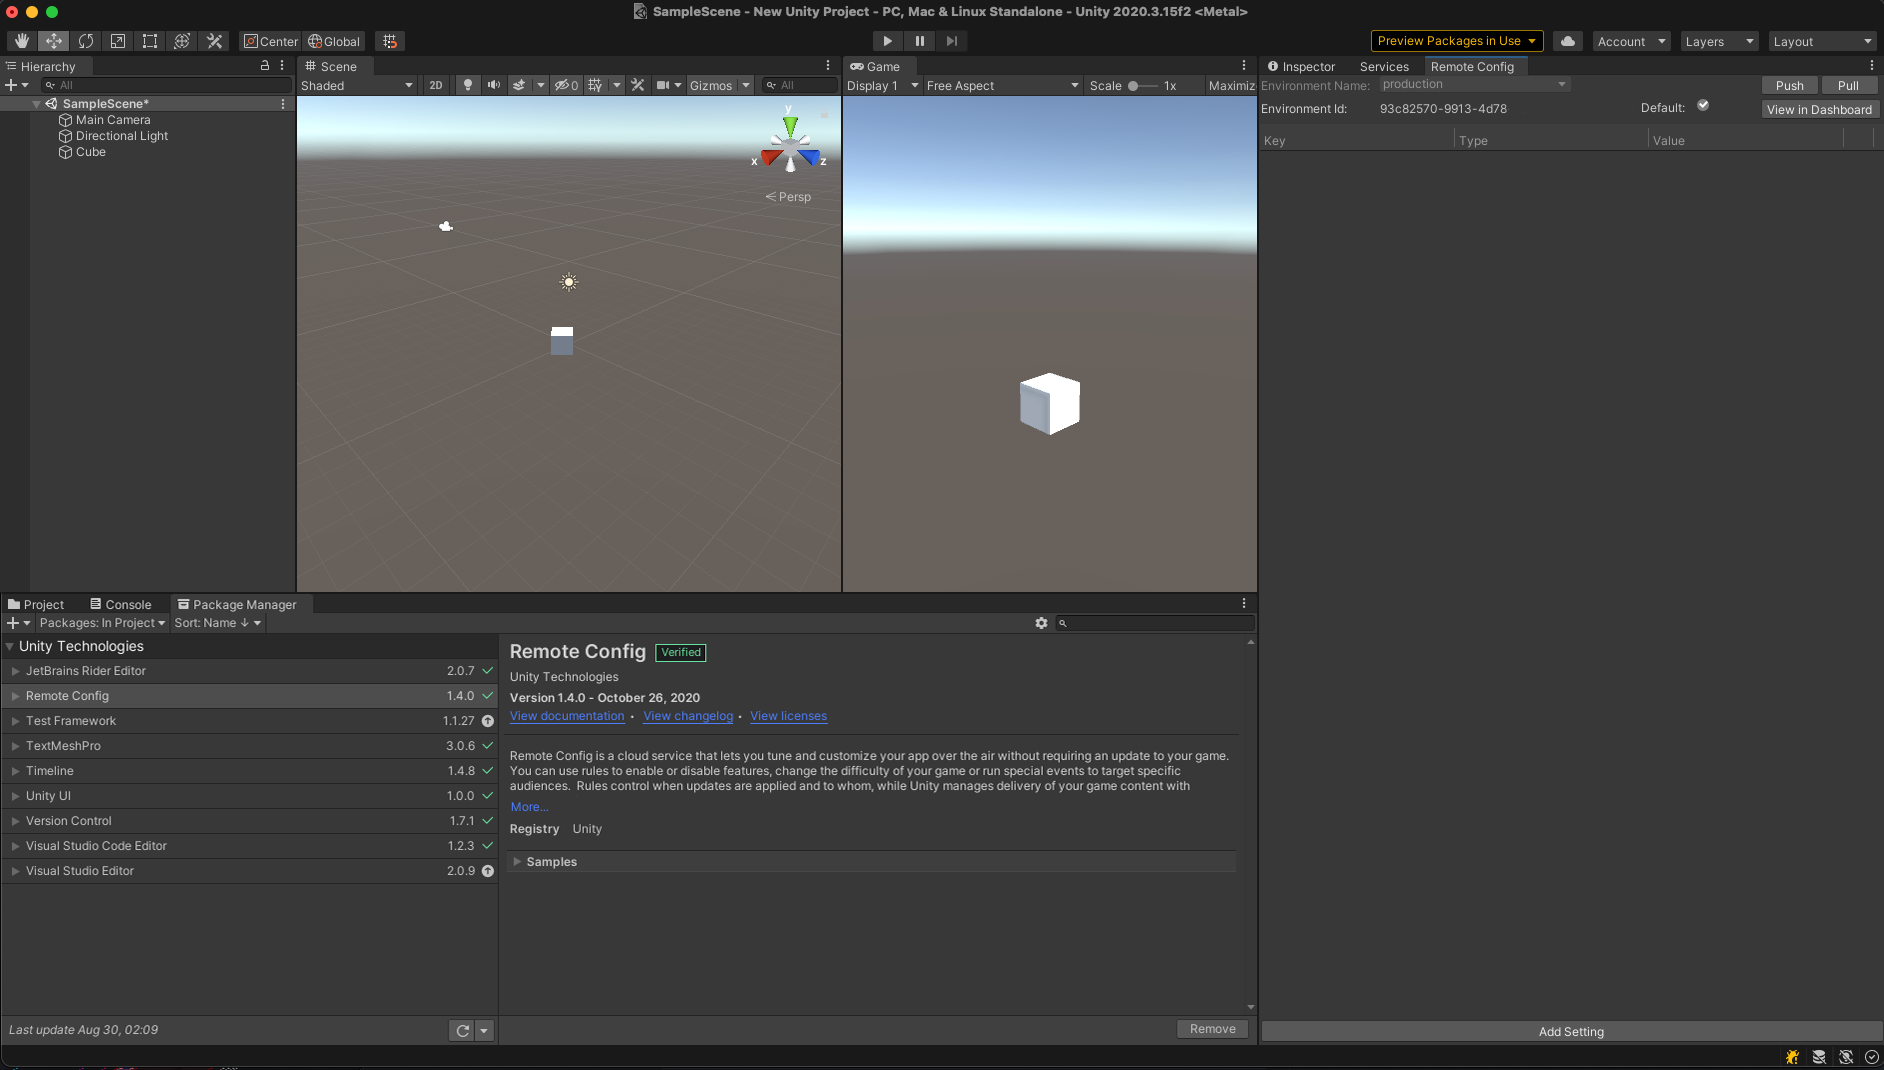 Navigating to the Remote Config window in the Unity Editor.